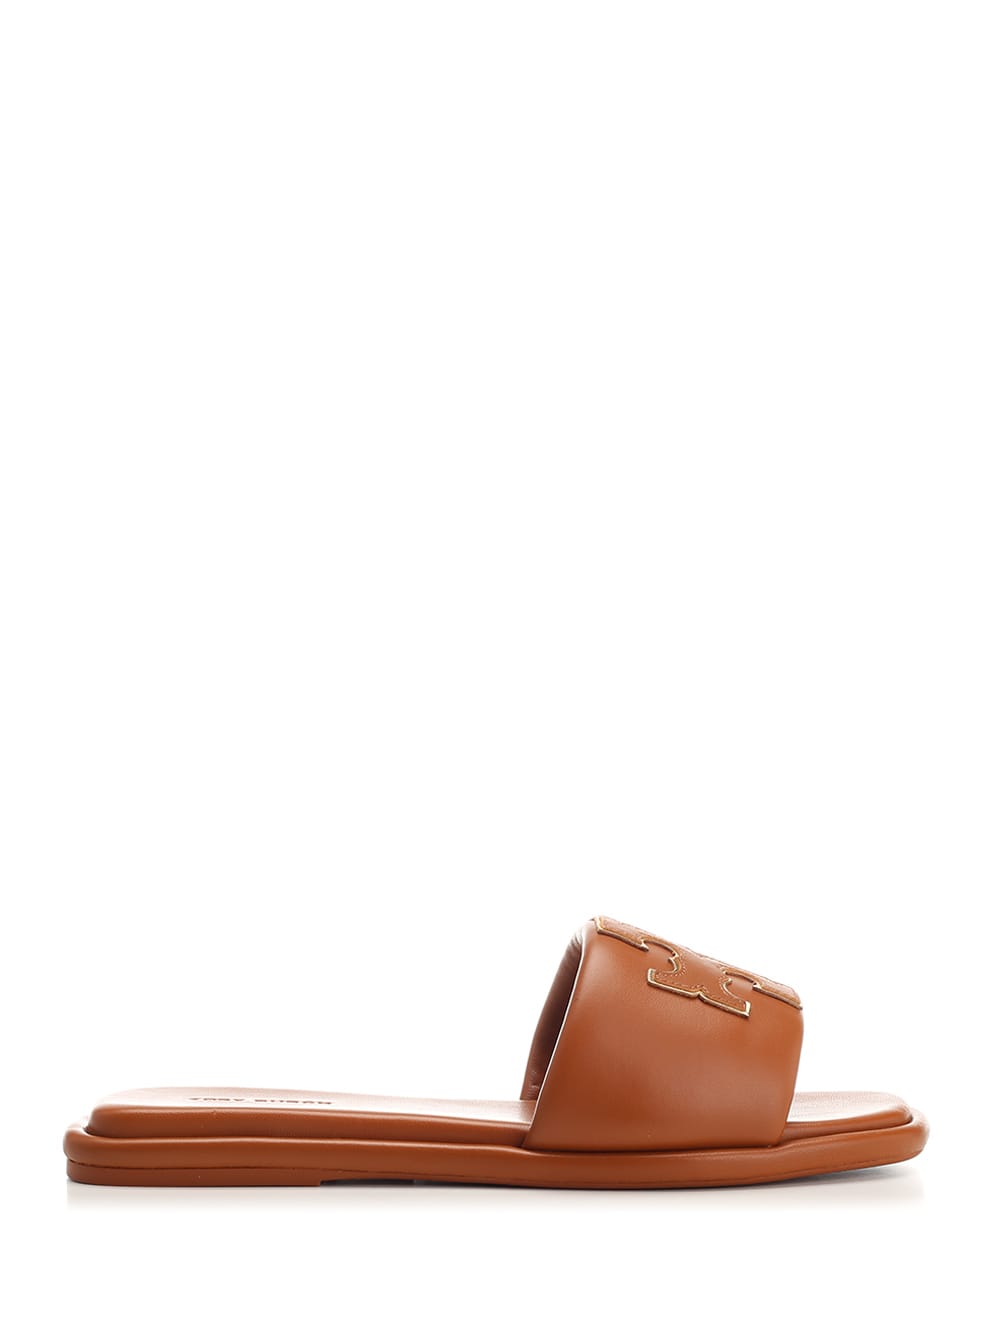 Tory Burch Leather Slide In Brown